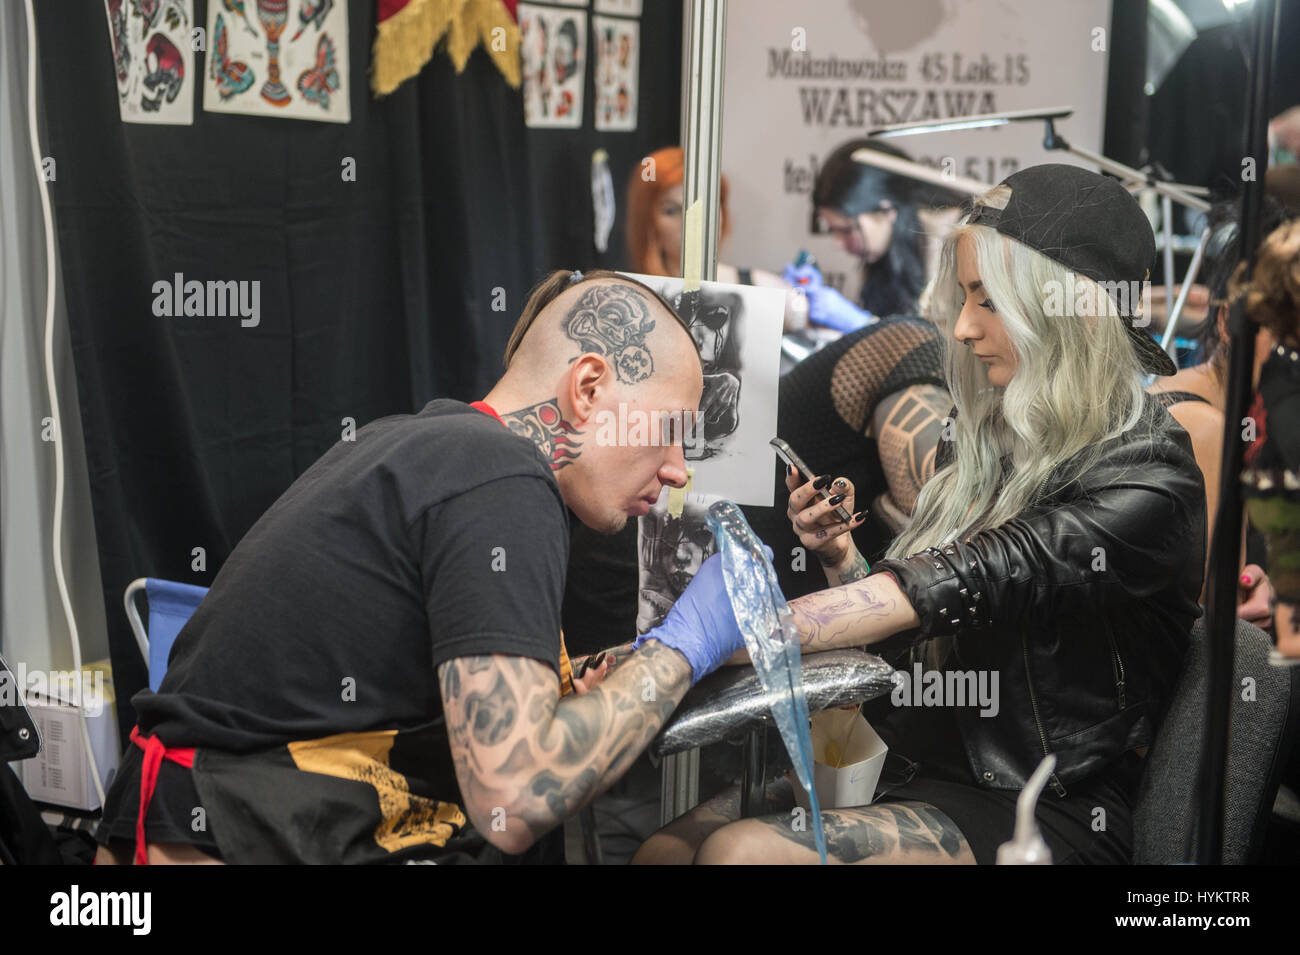 What To Wear When Getting a Hip Tattoo - AuthorityTattoo